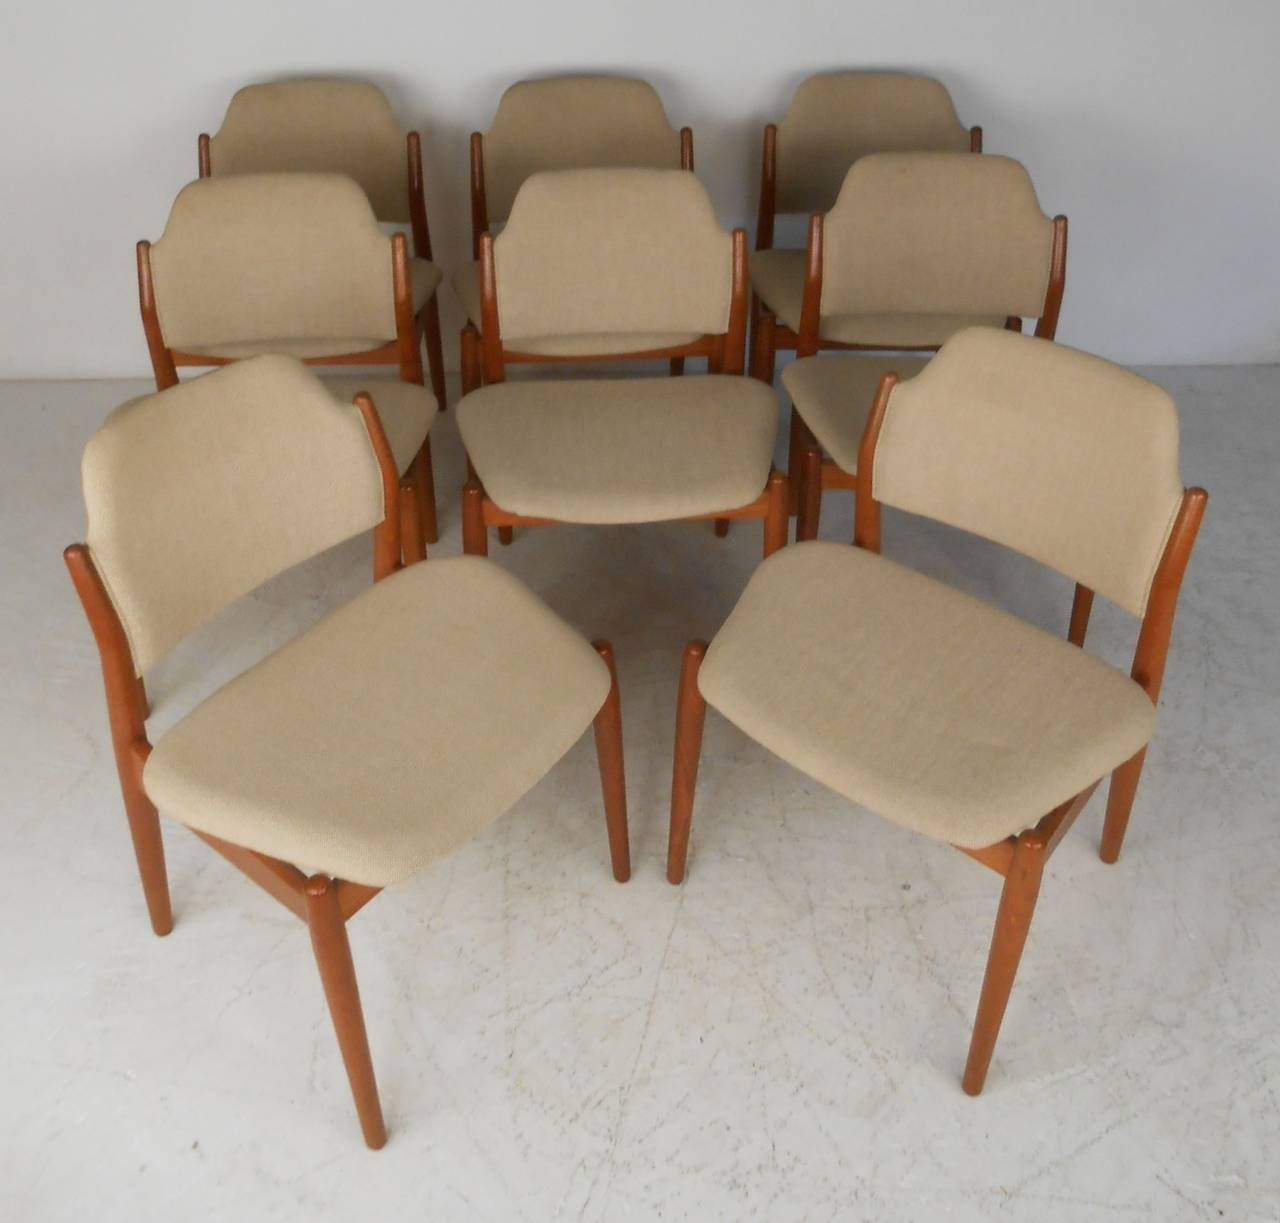  Arne Vodder Teak Dining Set with Eight Chairs for Sibast In Good Condition For Sale In Brooklyn, NY